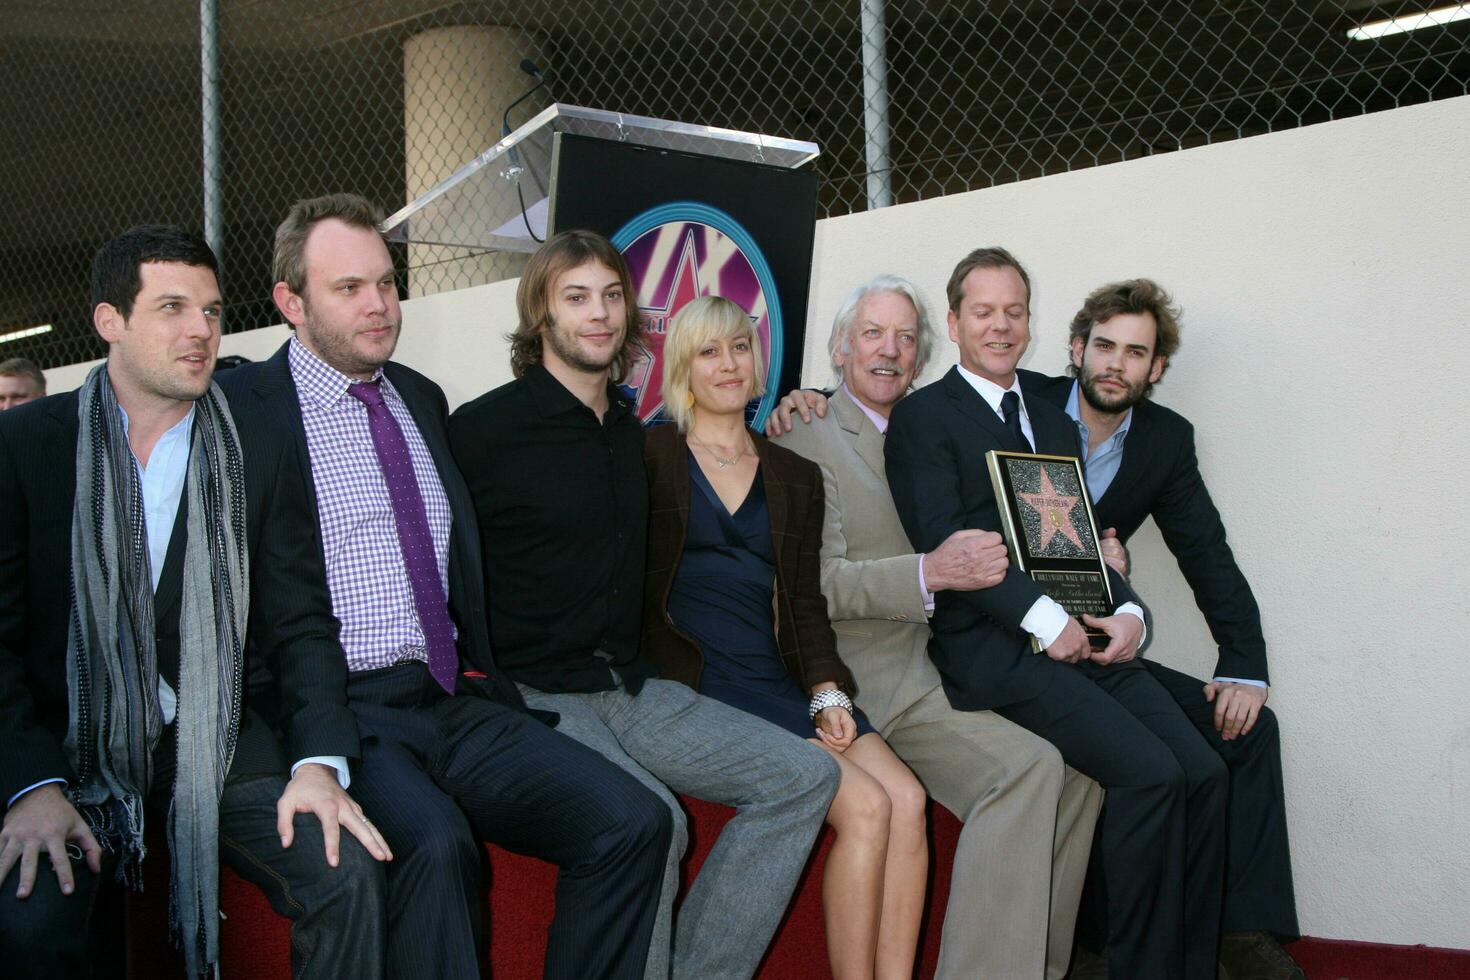 Kiefer Sutherland  Family at the Hollywood Walk of Fame ceremony for Kiefer Sutherland in Hollywood CA December 9 2008 photo